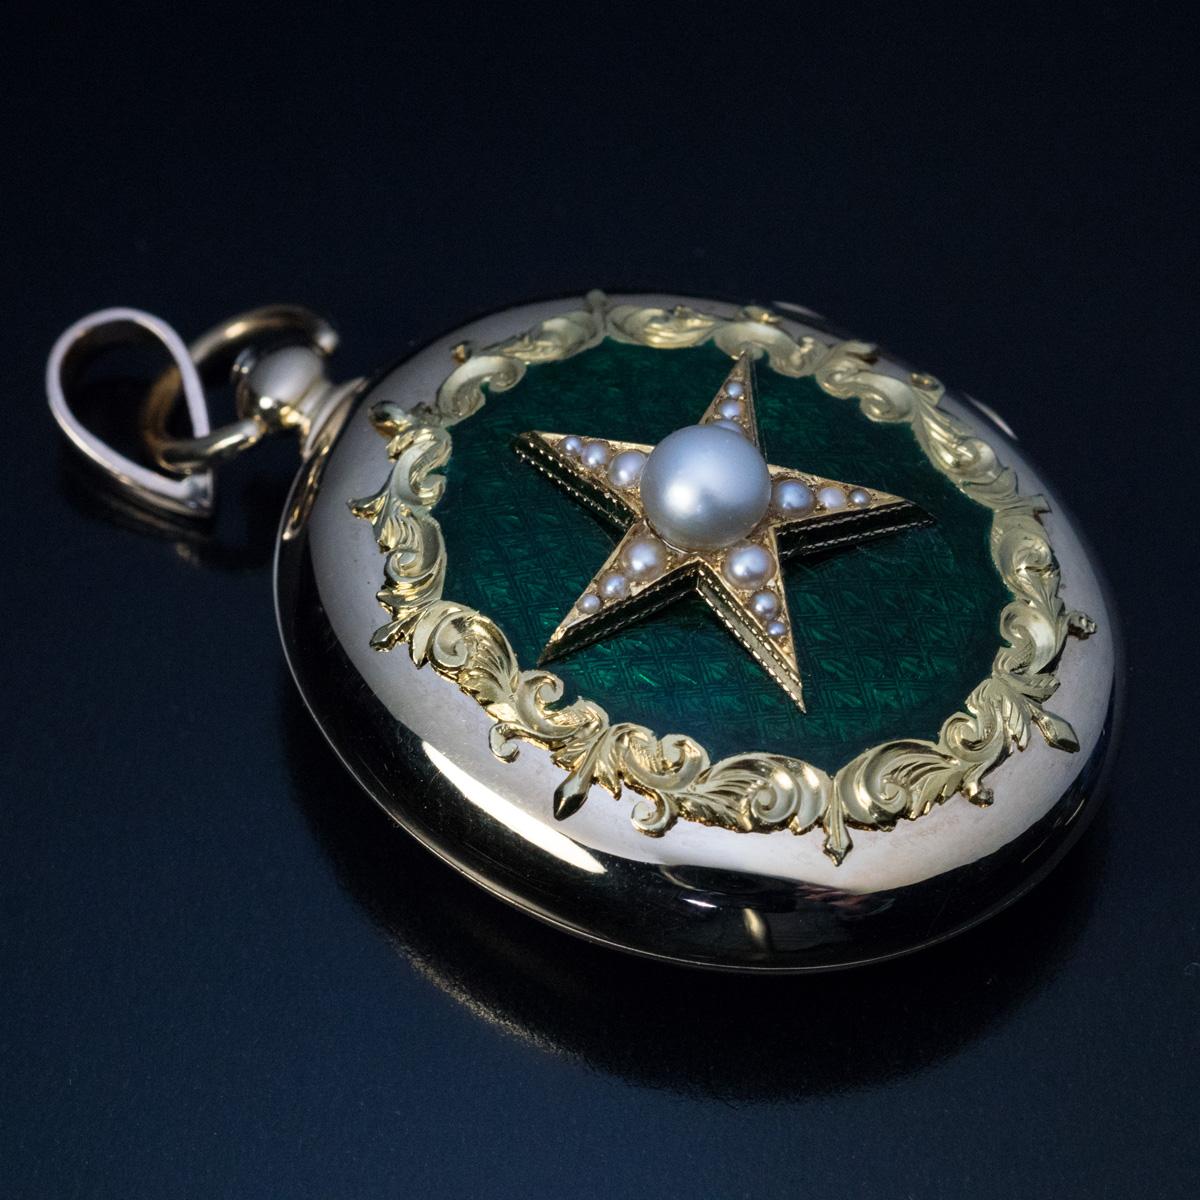 Austrian, circa 1870

An impressive antique Victorian era large locket pendant is finely crafted in two tone 14K gold. The front cover of the locket is centered with a pearl star mounted on an alpine green guilloche enamel background and surrounded